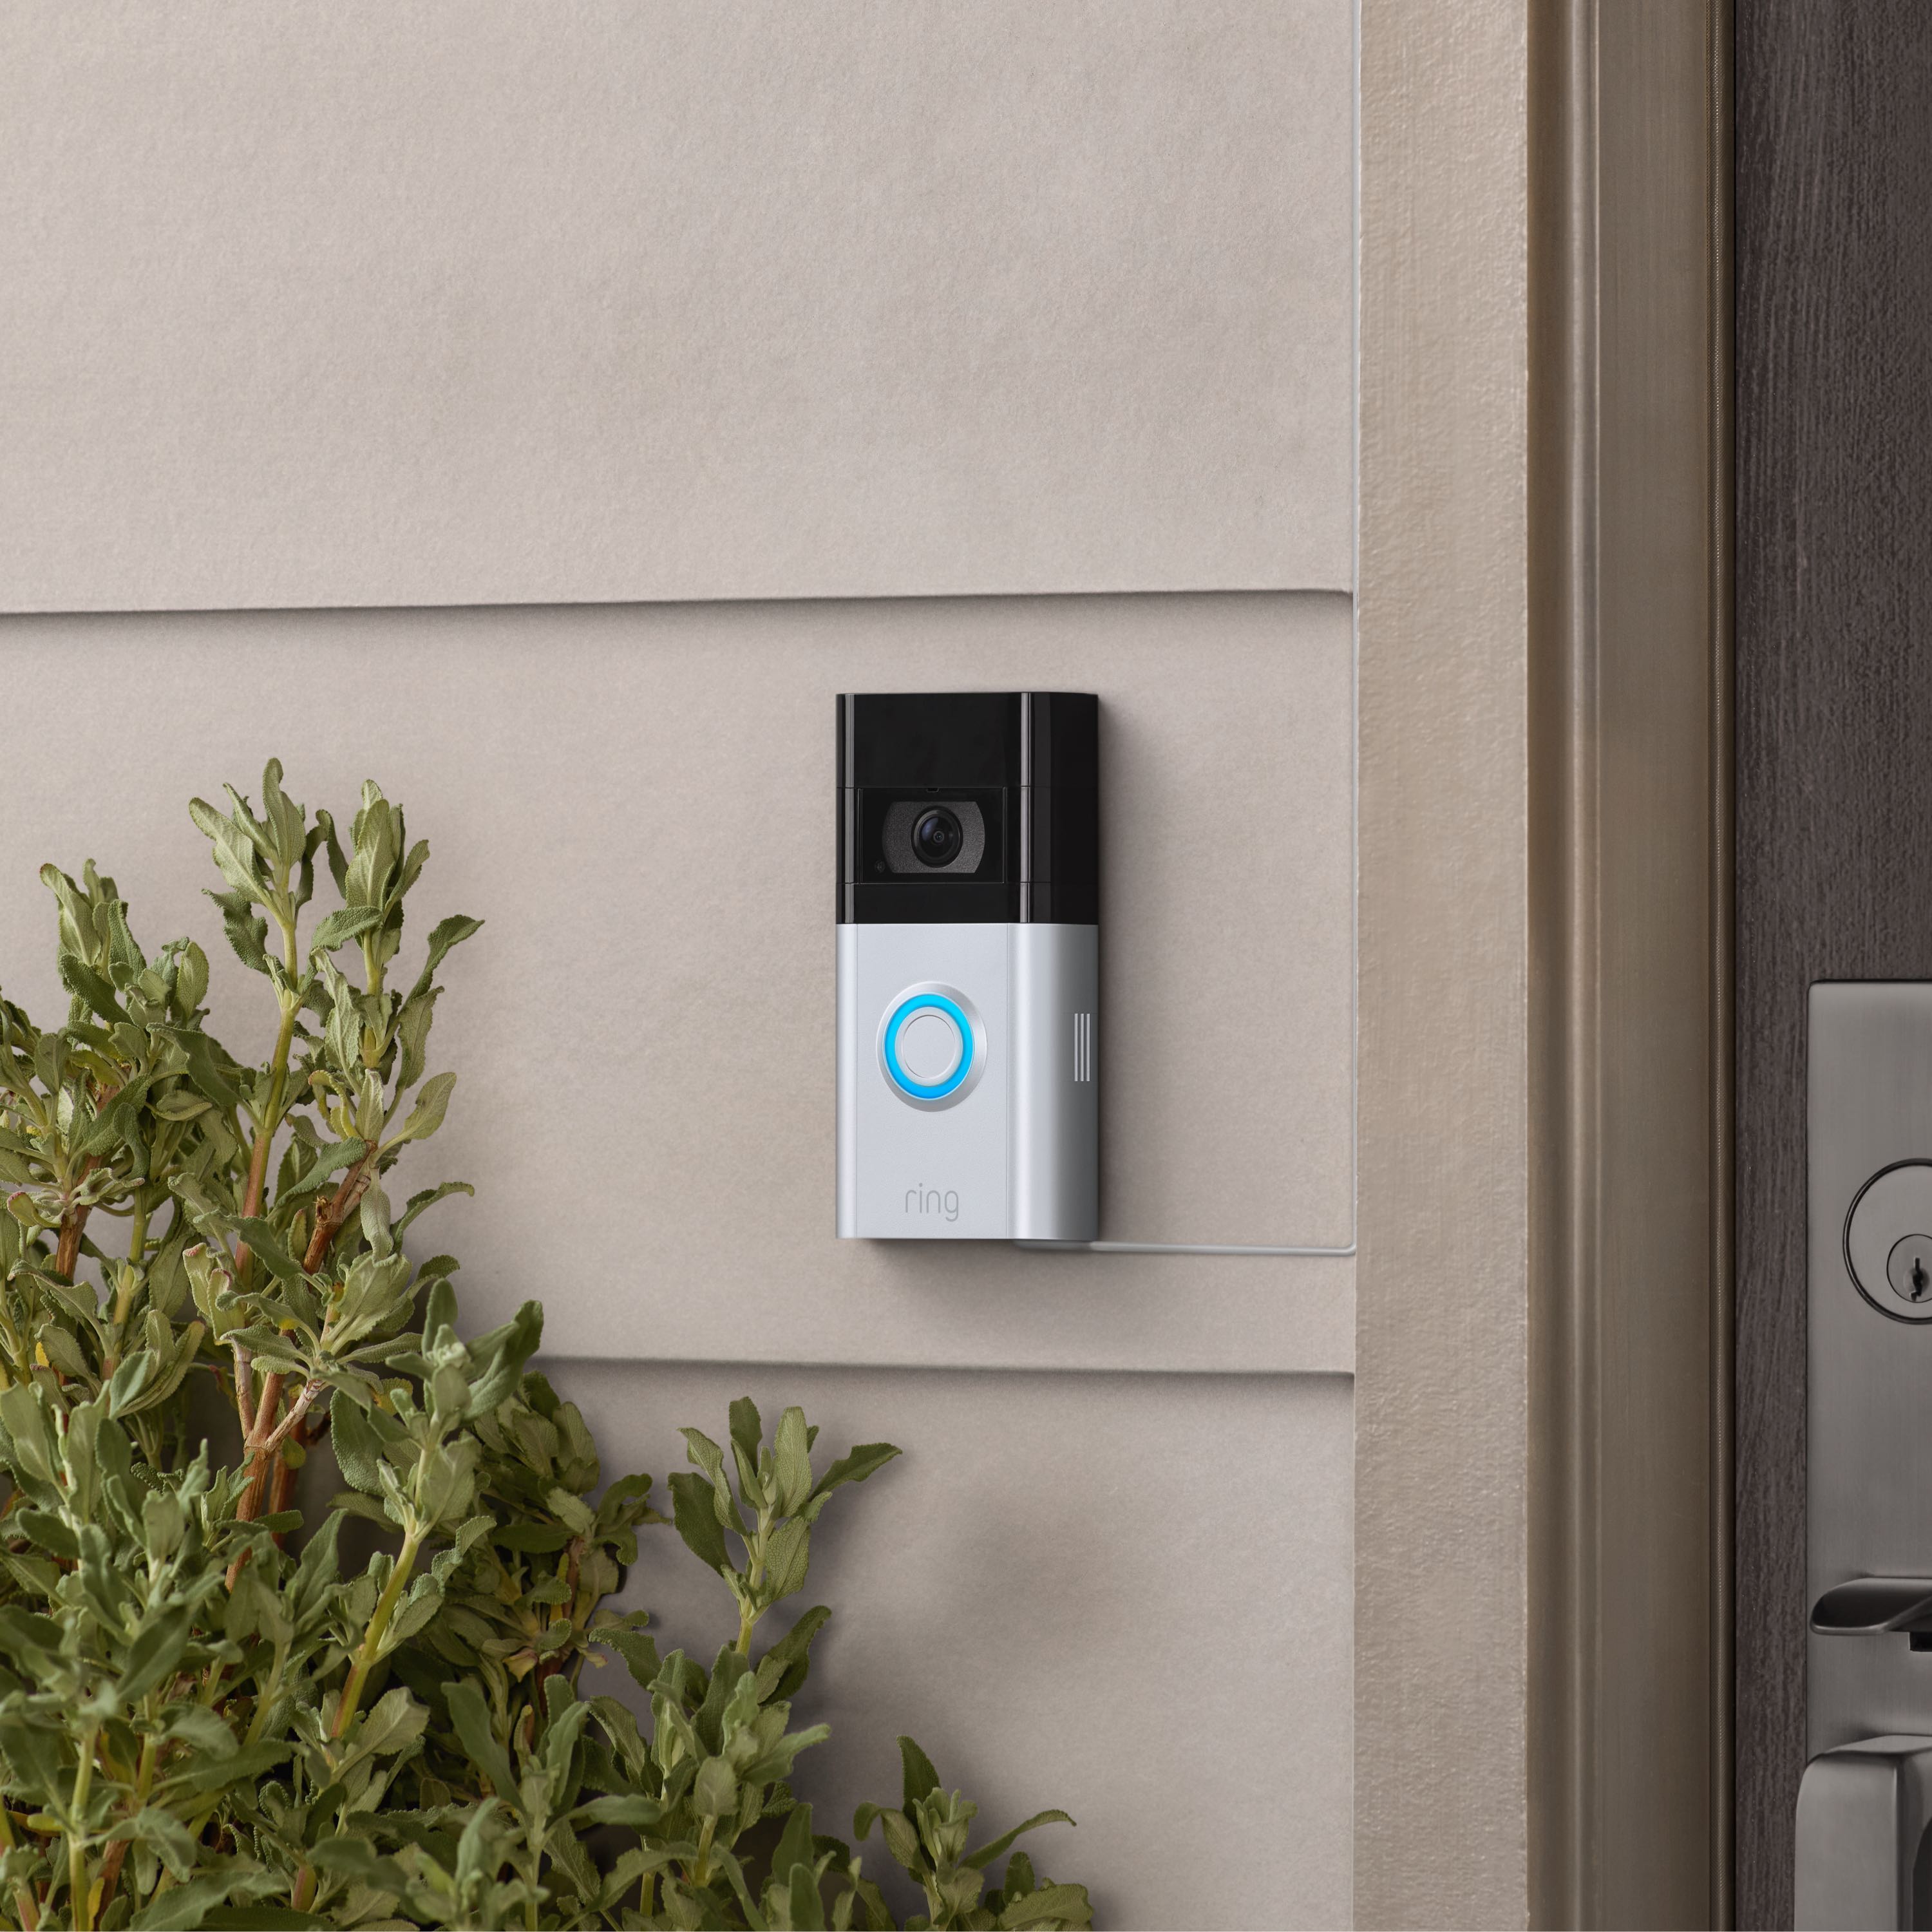 Charging Station + 2 Quick Release Battery Packs - Video Doorbell, 2nd Generation with satin nickel finish mounted to exterior wall of home next to front door.